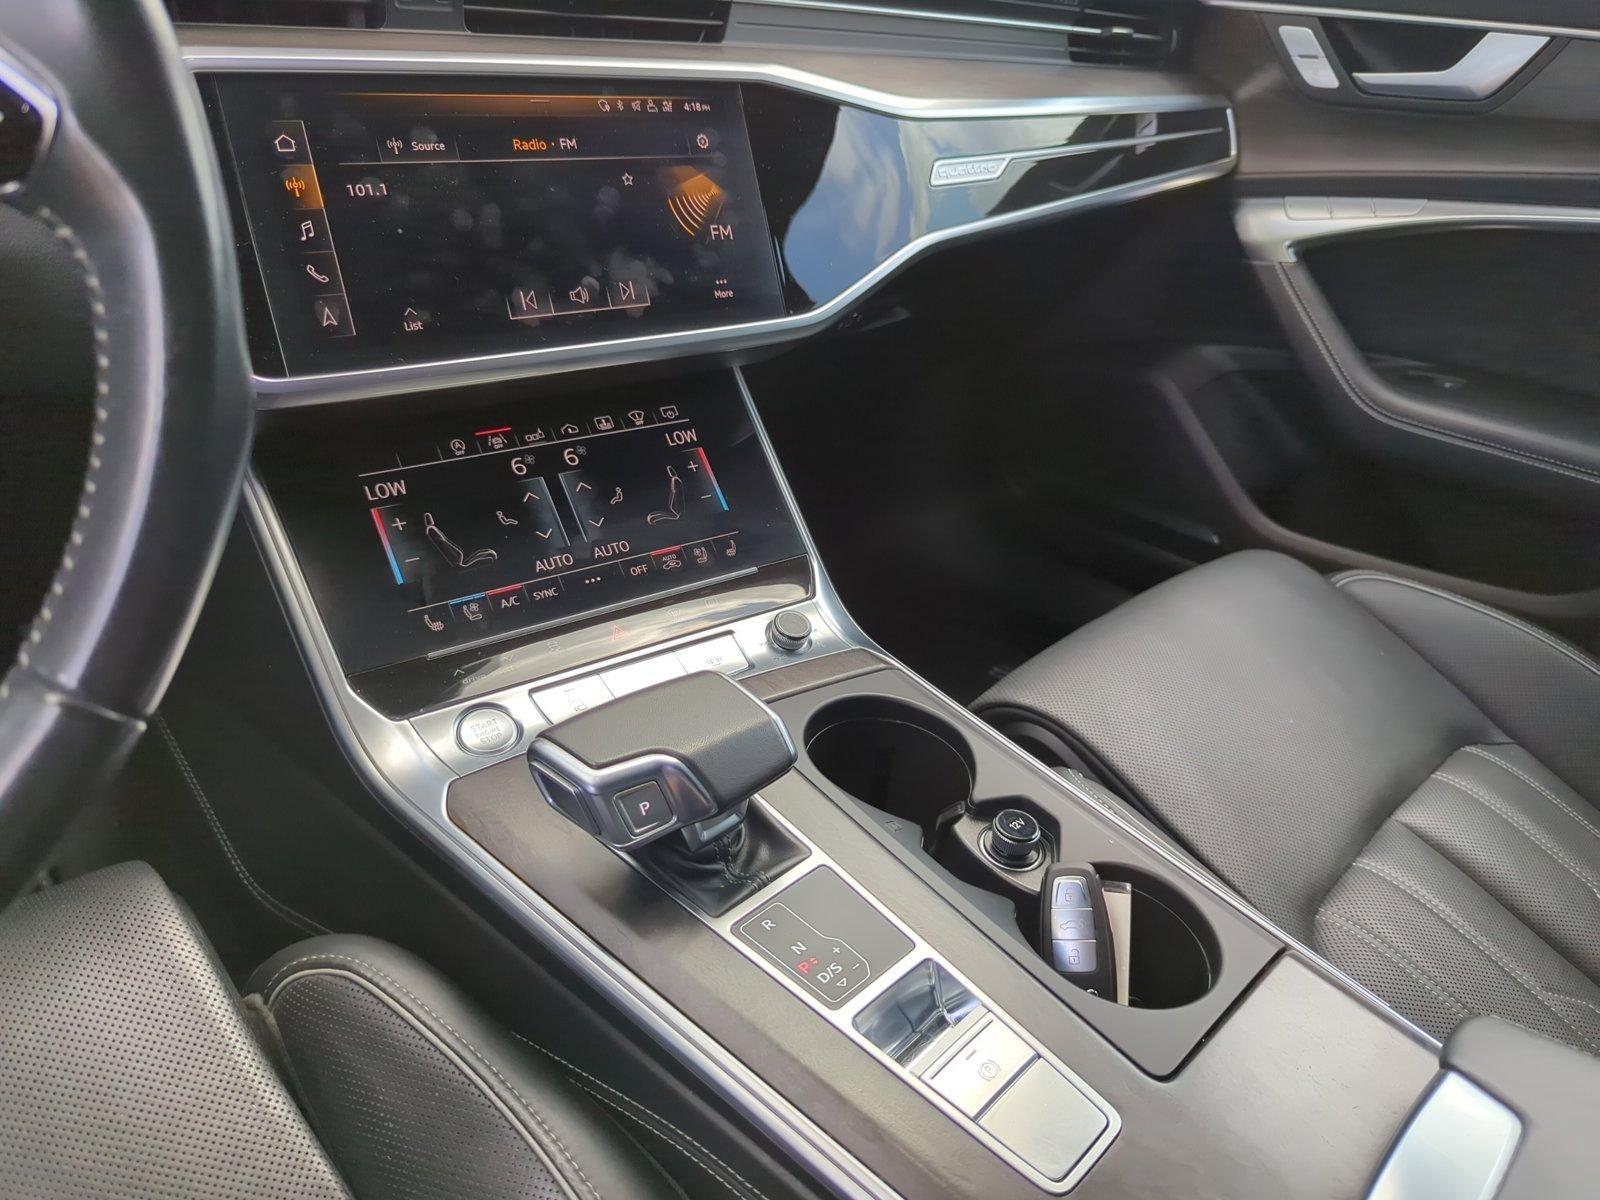 2019 Audi A6 Vehicle Photo in Hollywood, FL 33021